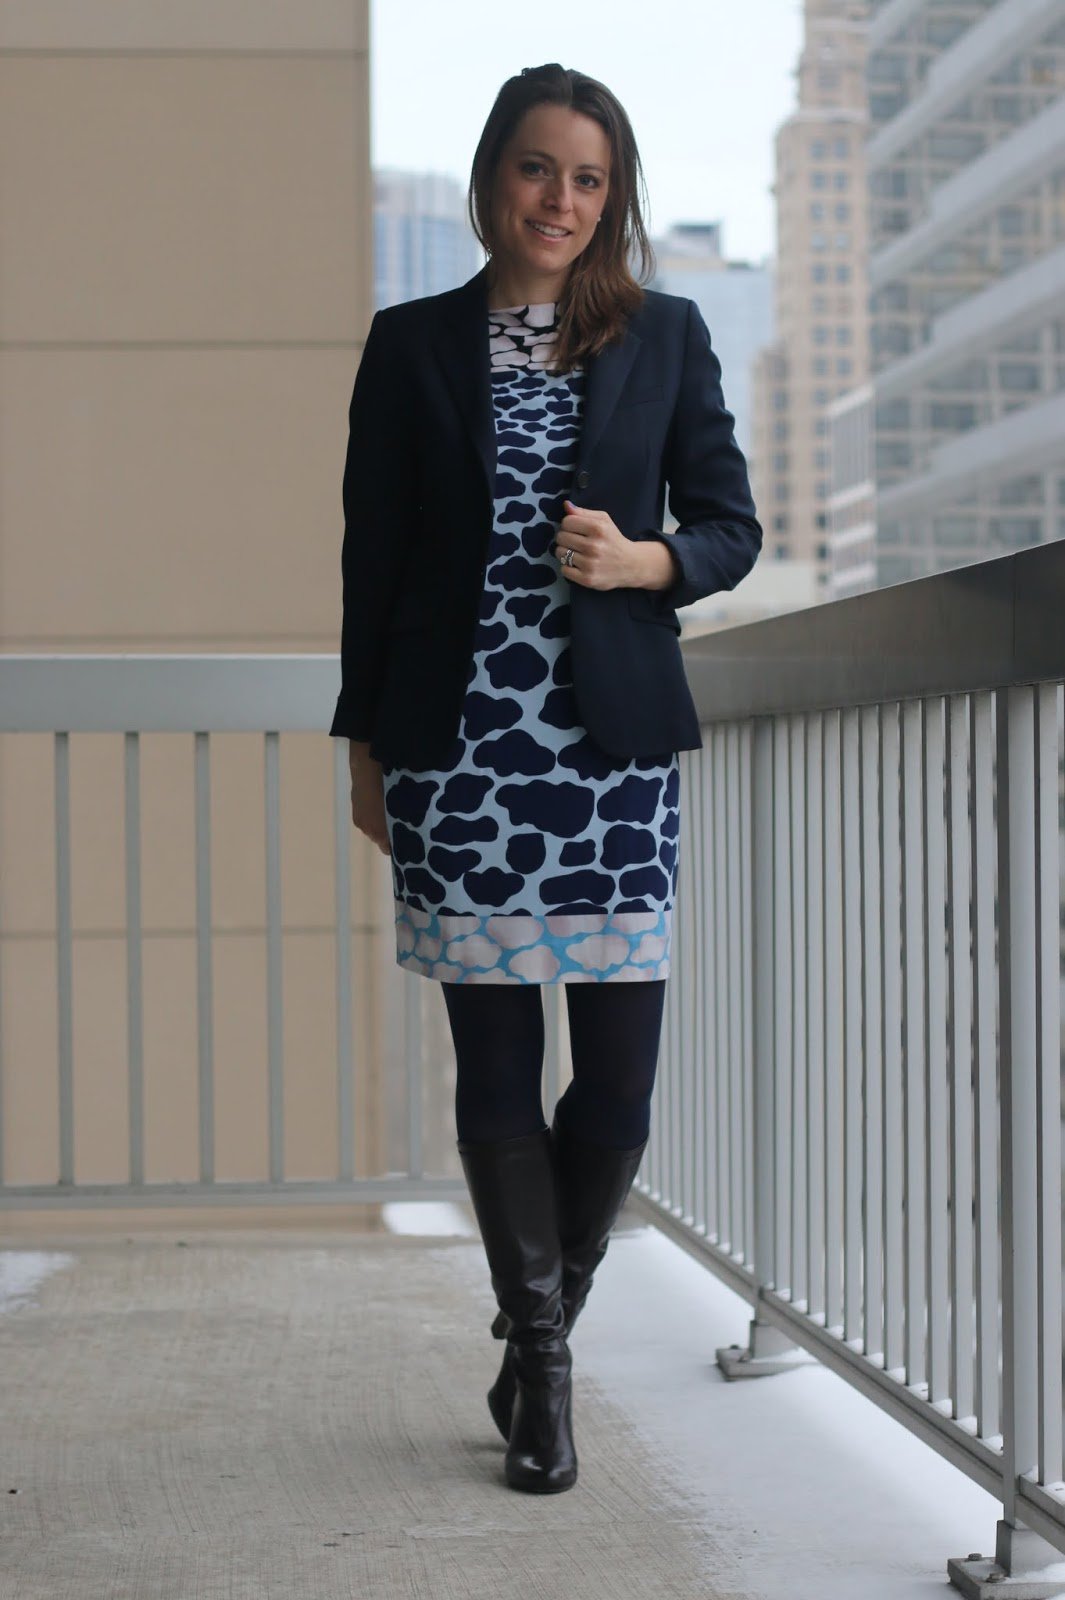 FashionablyEmployed.com | Thrifted giraffe print DVF dress, thrifted navy blazer, navy tights and brown boots, expert thrifting tips from seasoned thrifters, wear to work office style